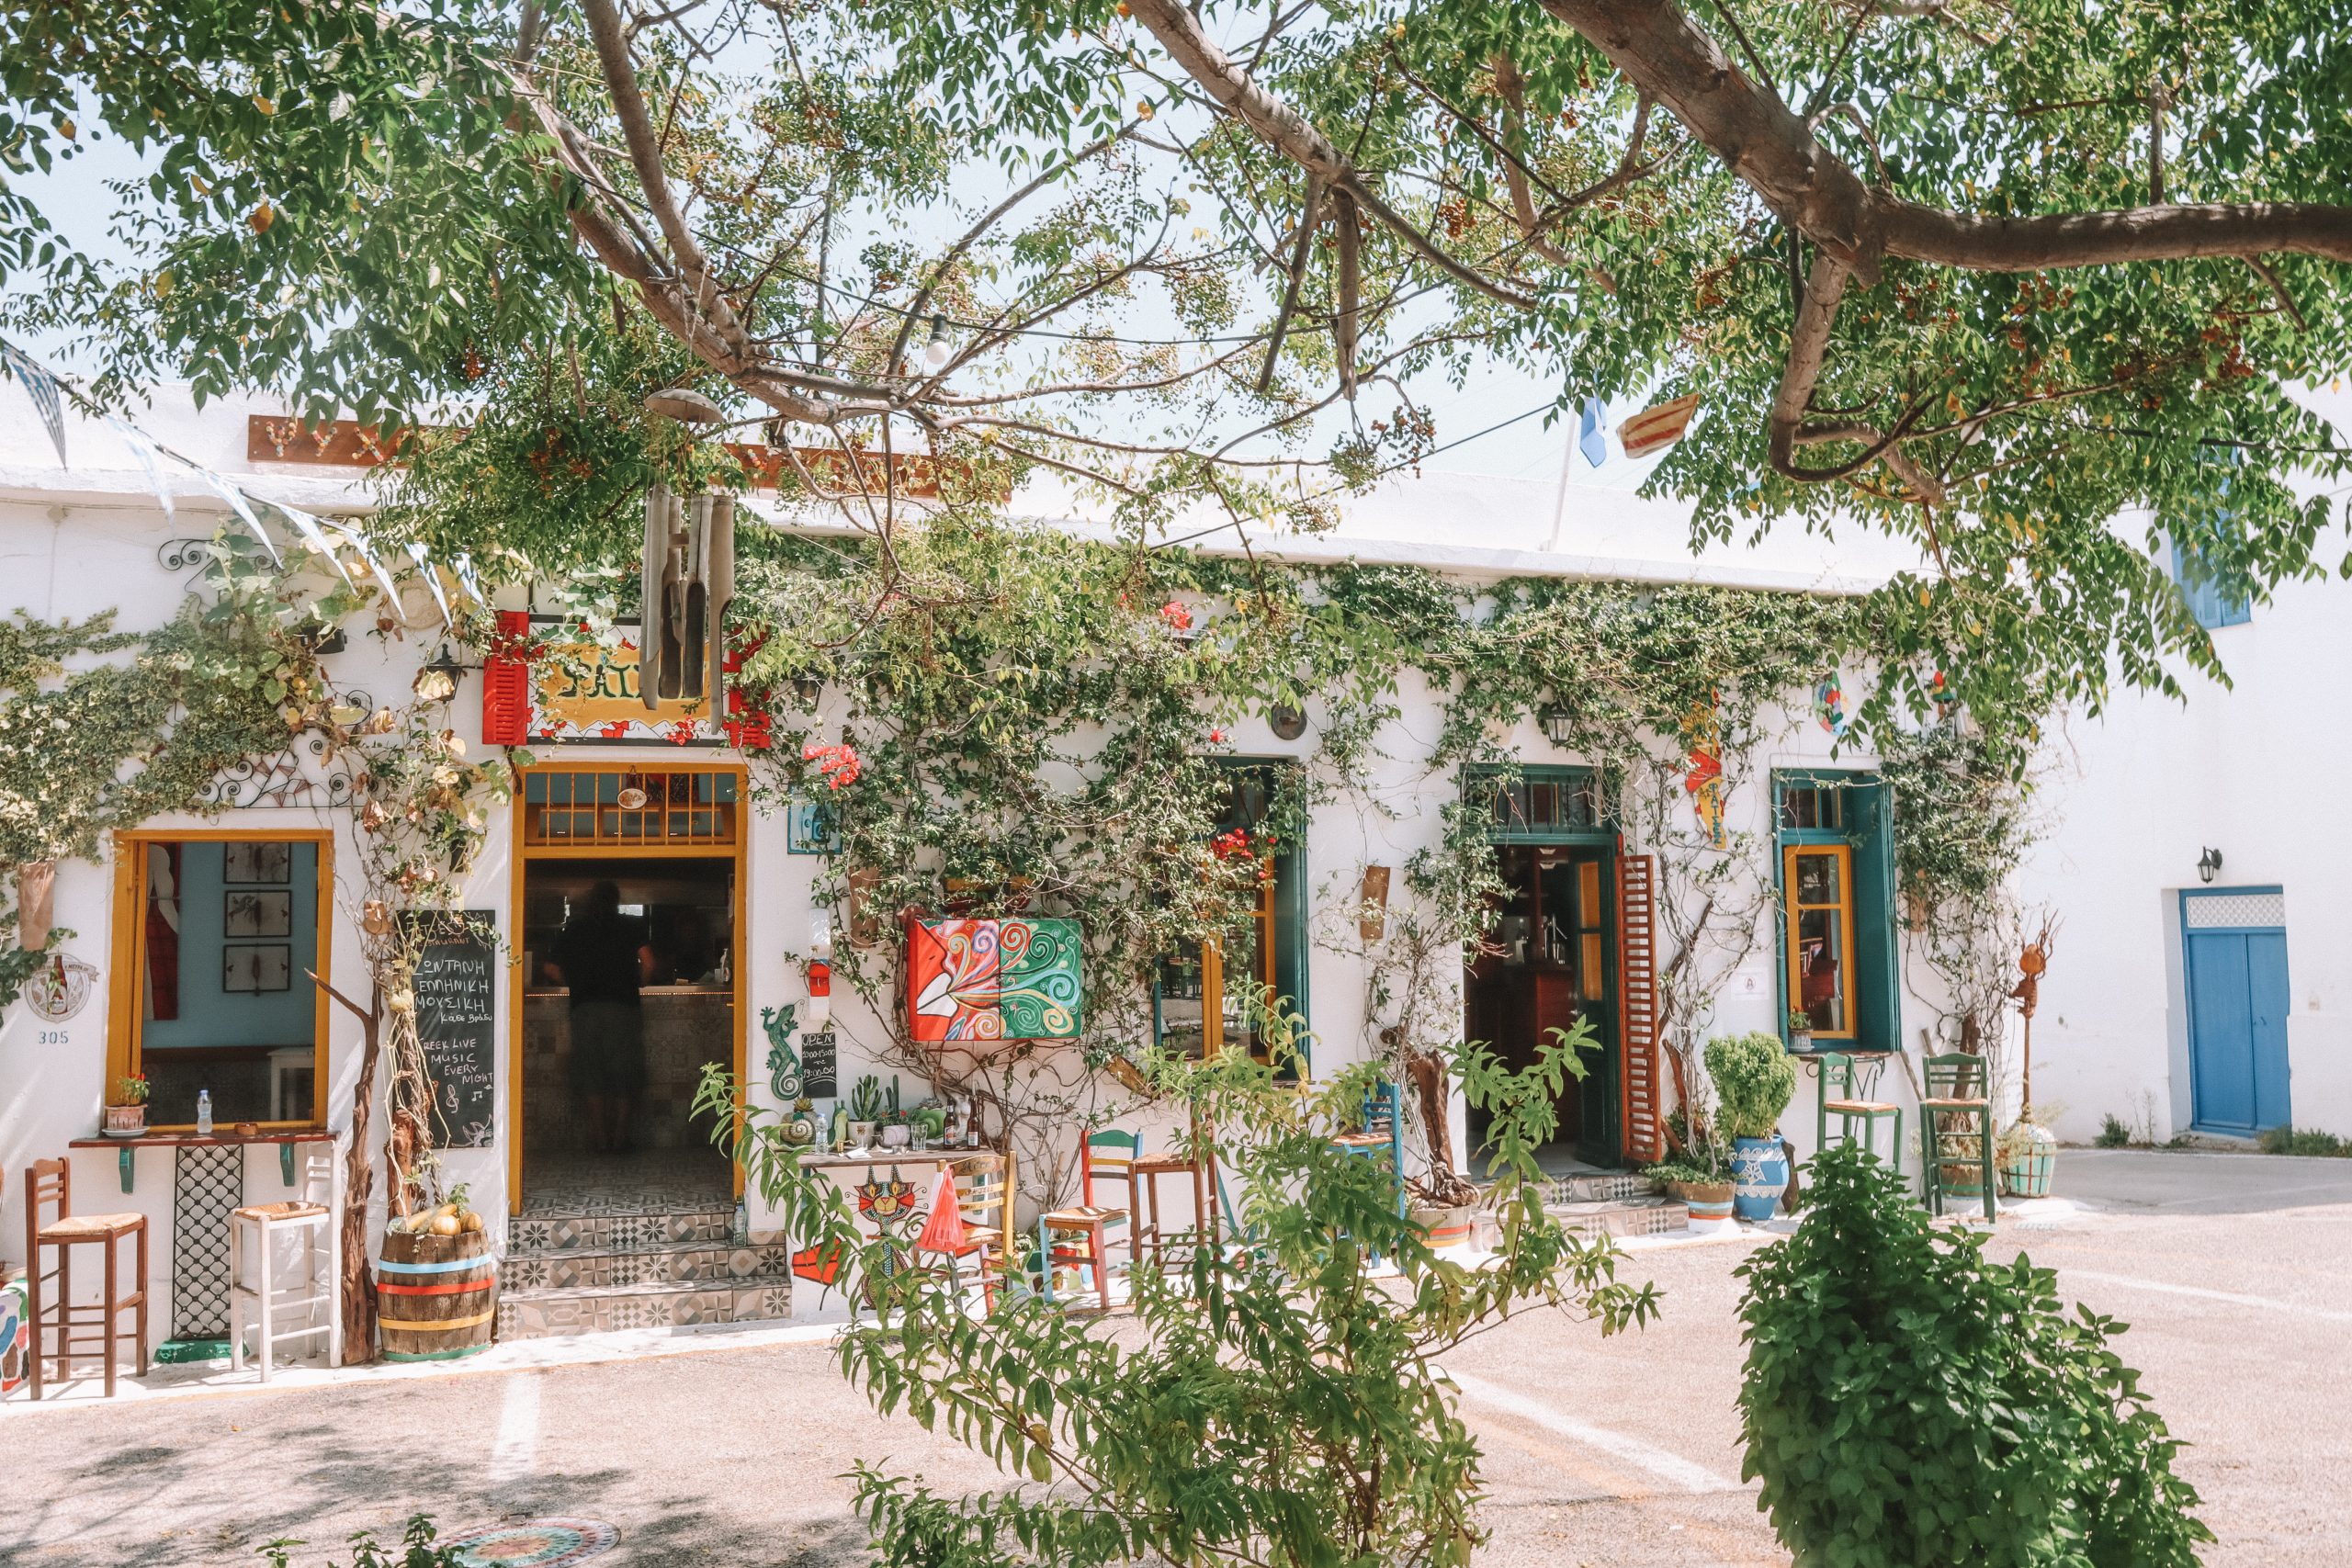 A cafe with greenery and flowers surrounding it in Milos